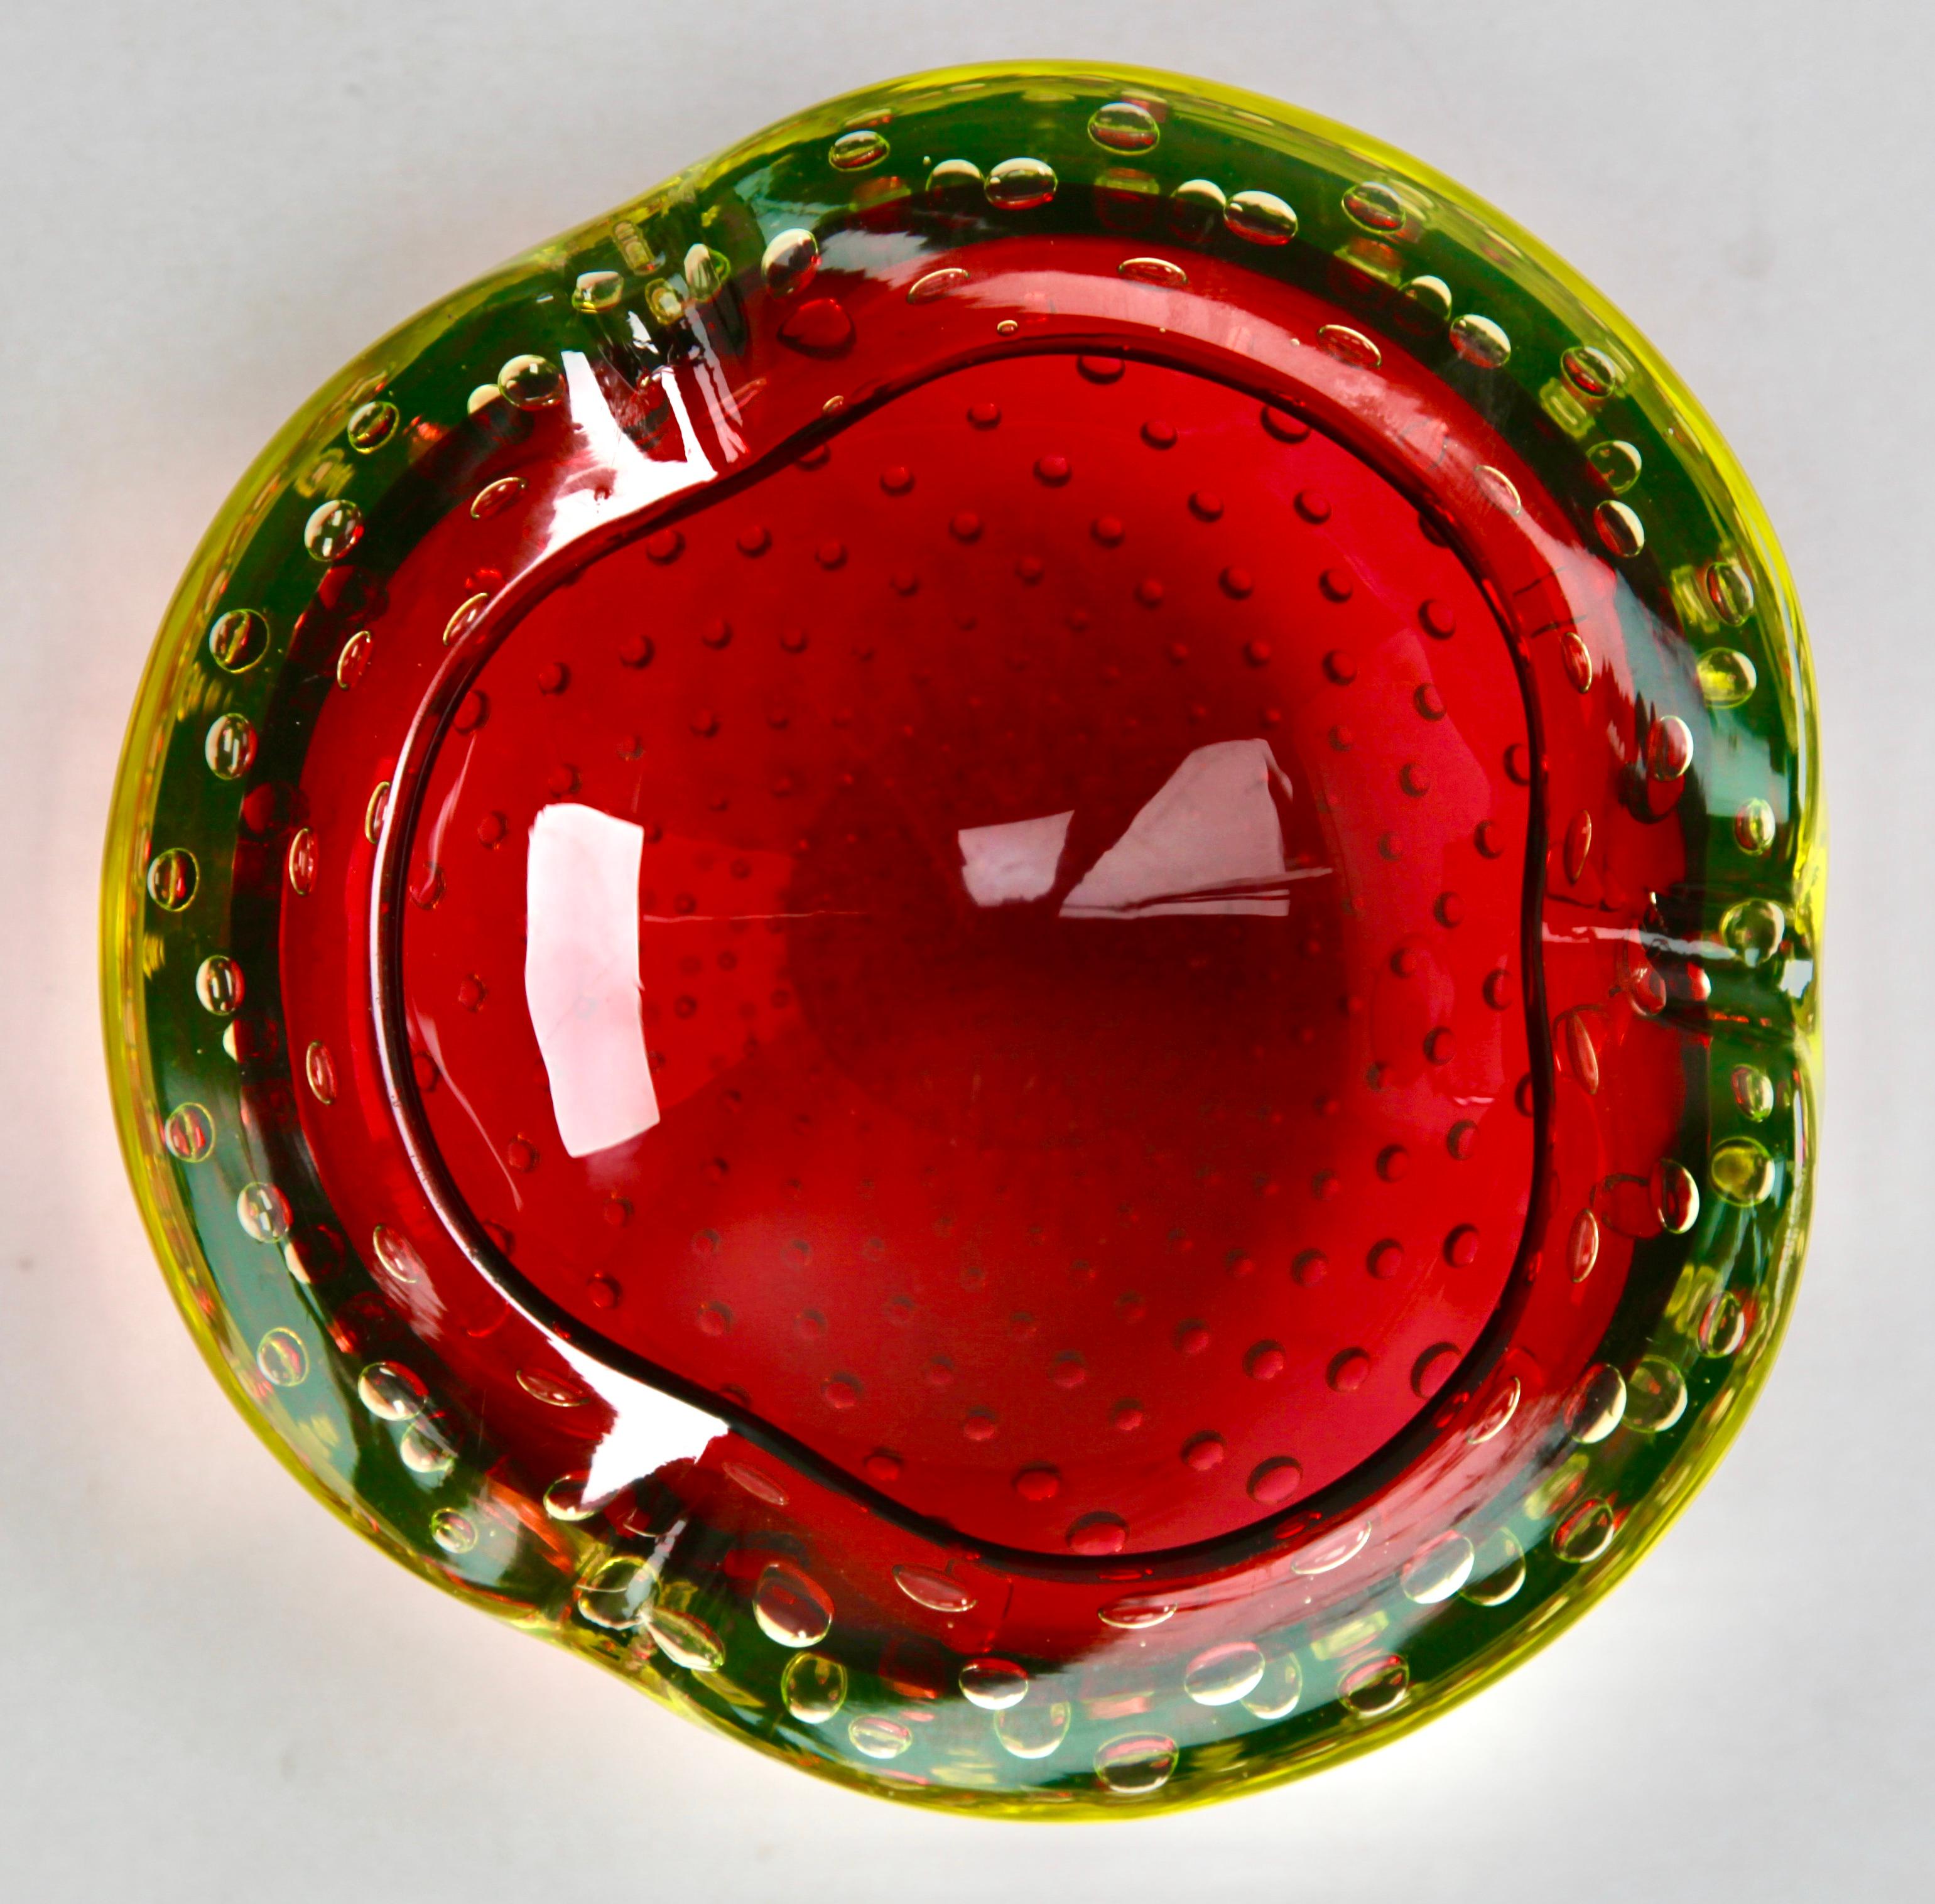 Attributed to Flavio Poli for Seguso d'Arte, this biomorphic Murano glass bowl is handcrafted with red highlights fading through bringing warmth into your color scheme.
Still in lovely condition with only a few light scratches under the polished